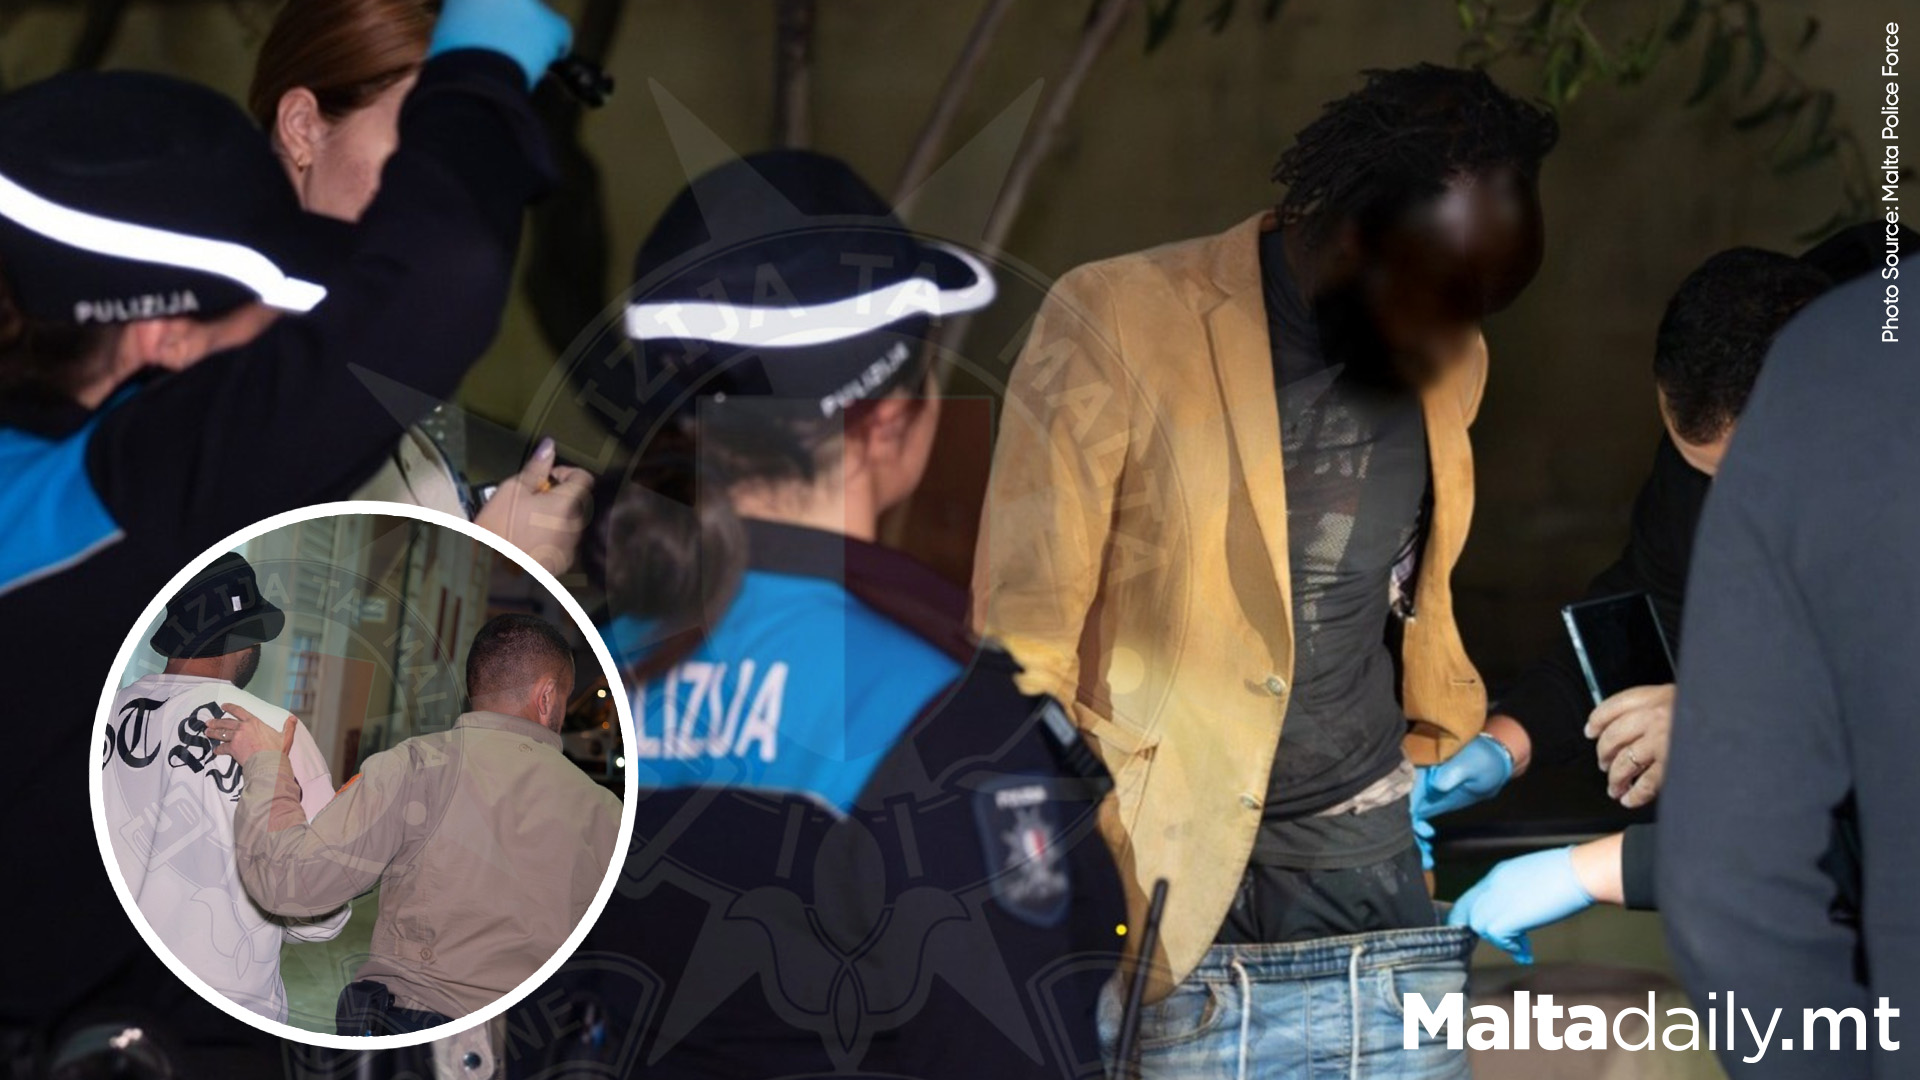 66 Unregular Immigrants Arrested In Various Police Inspections Around Malta